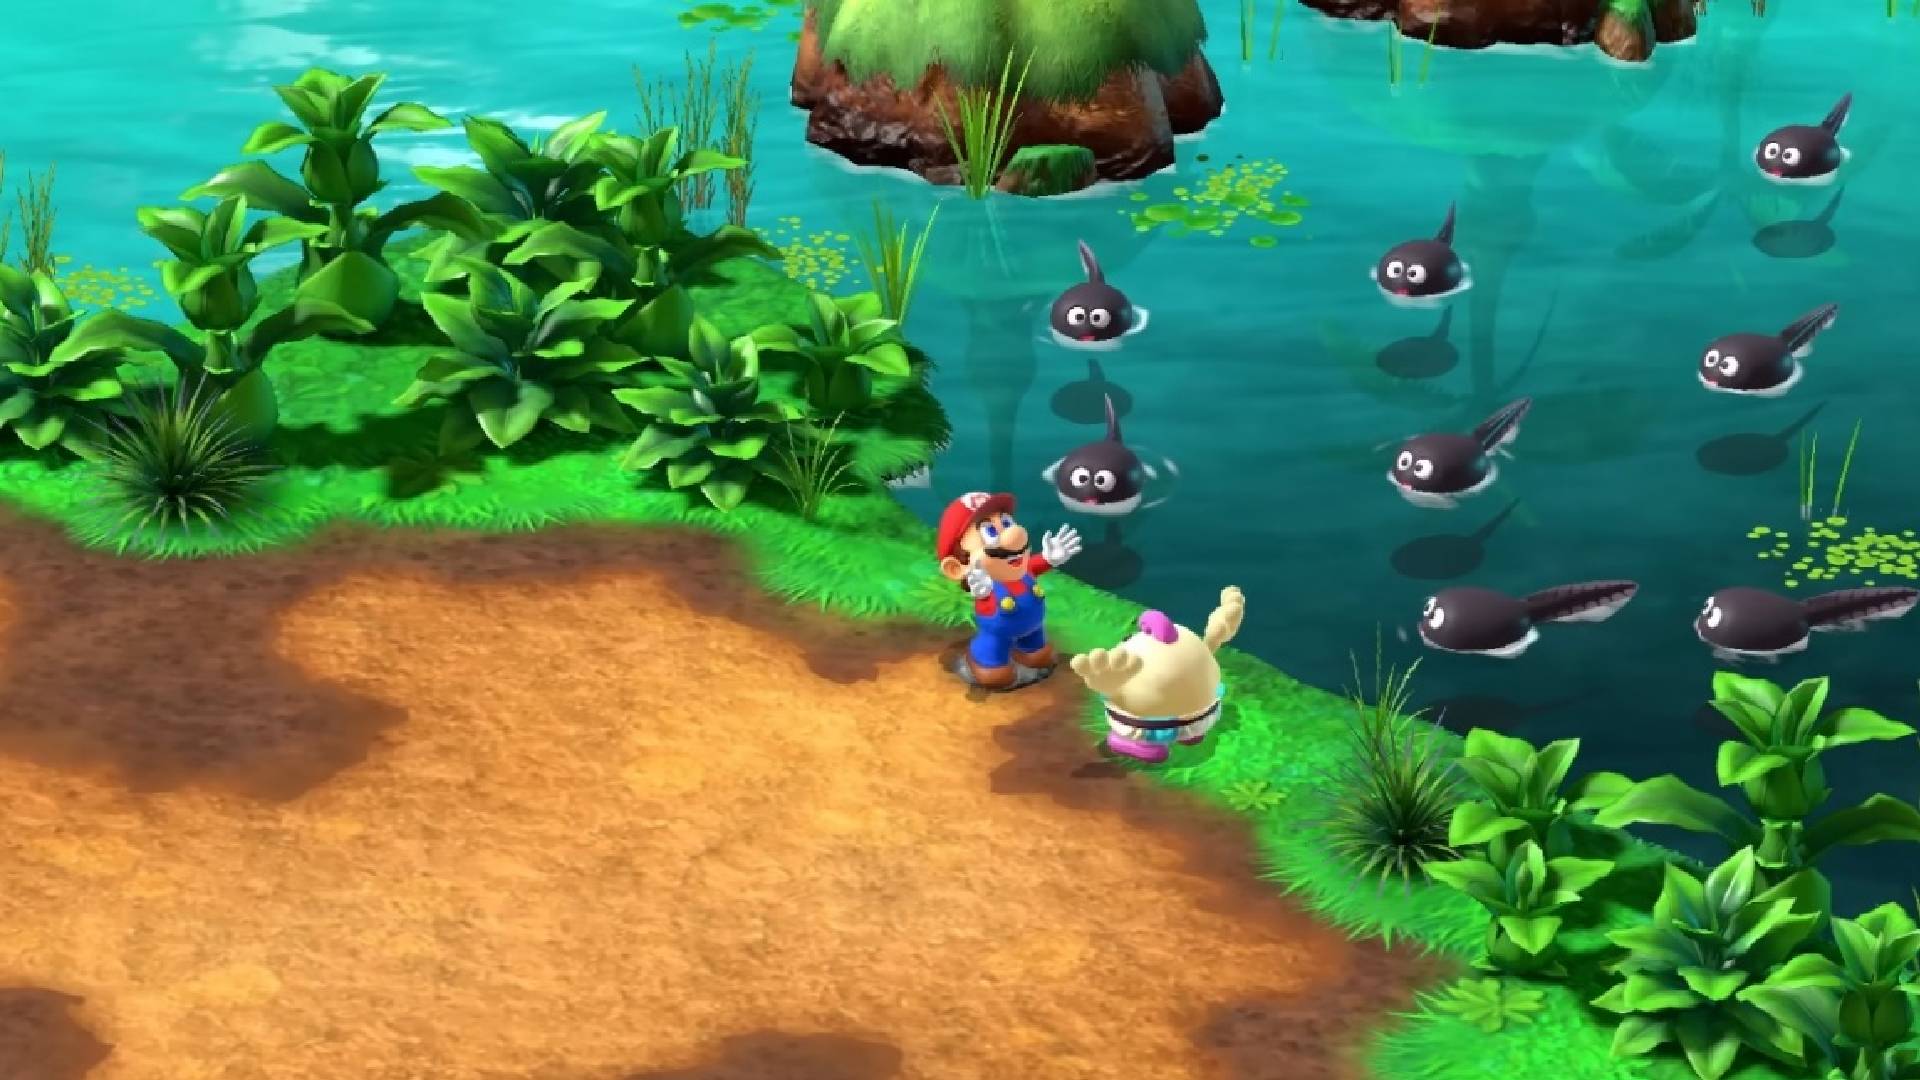 Mario and Mallow by a pond in Super Mario RPG Remake